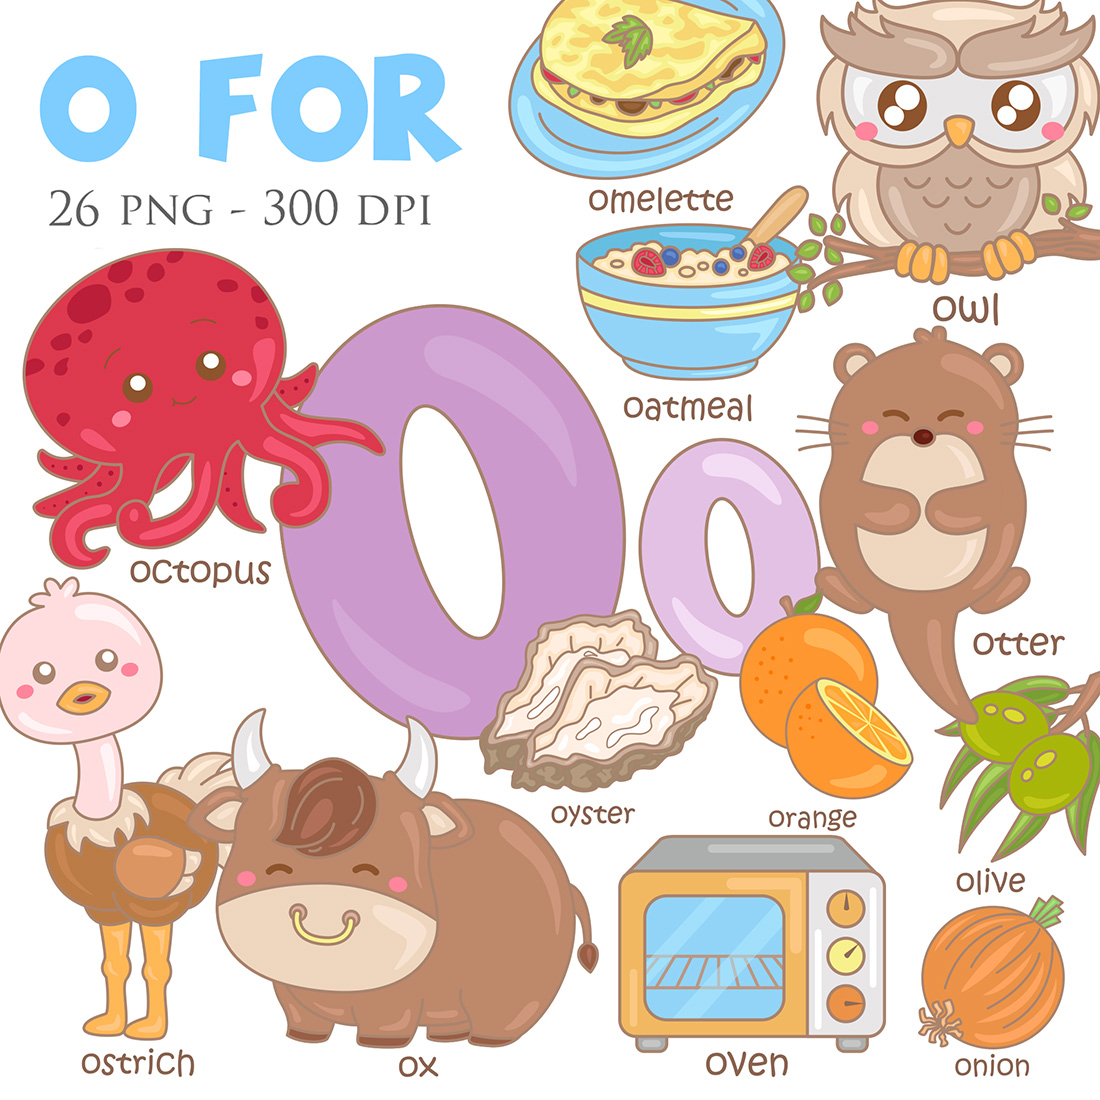 Alphabet O For Vocabulary School Letter Reading Writing Font Study Learning Student Toodler Kids Cartoon Orange Octopus Owl Oven Ox Olive Otter Oyster Onion Oatmeal Ostrich Omelette Illustration Vector Clipart cover image.